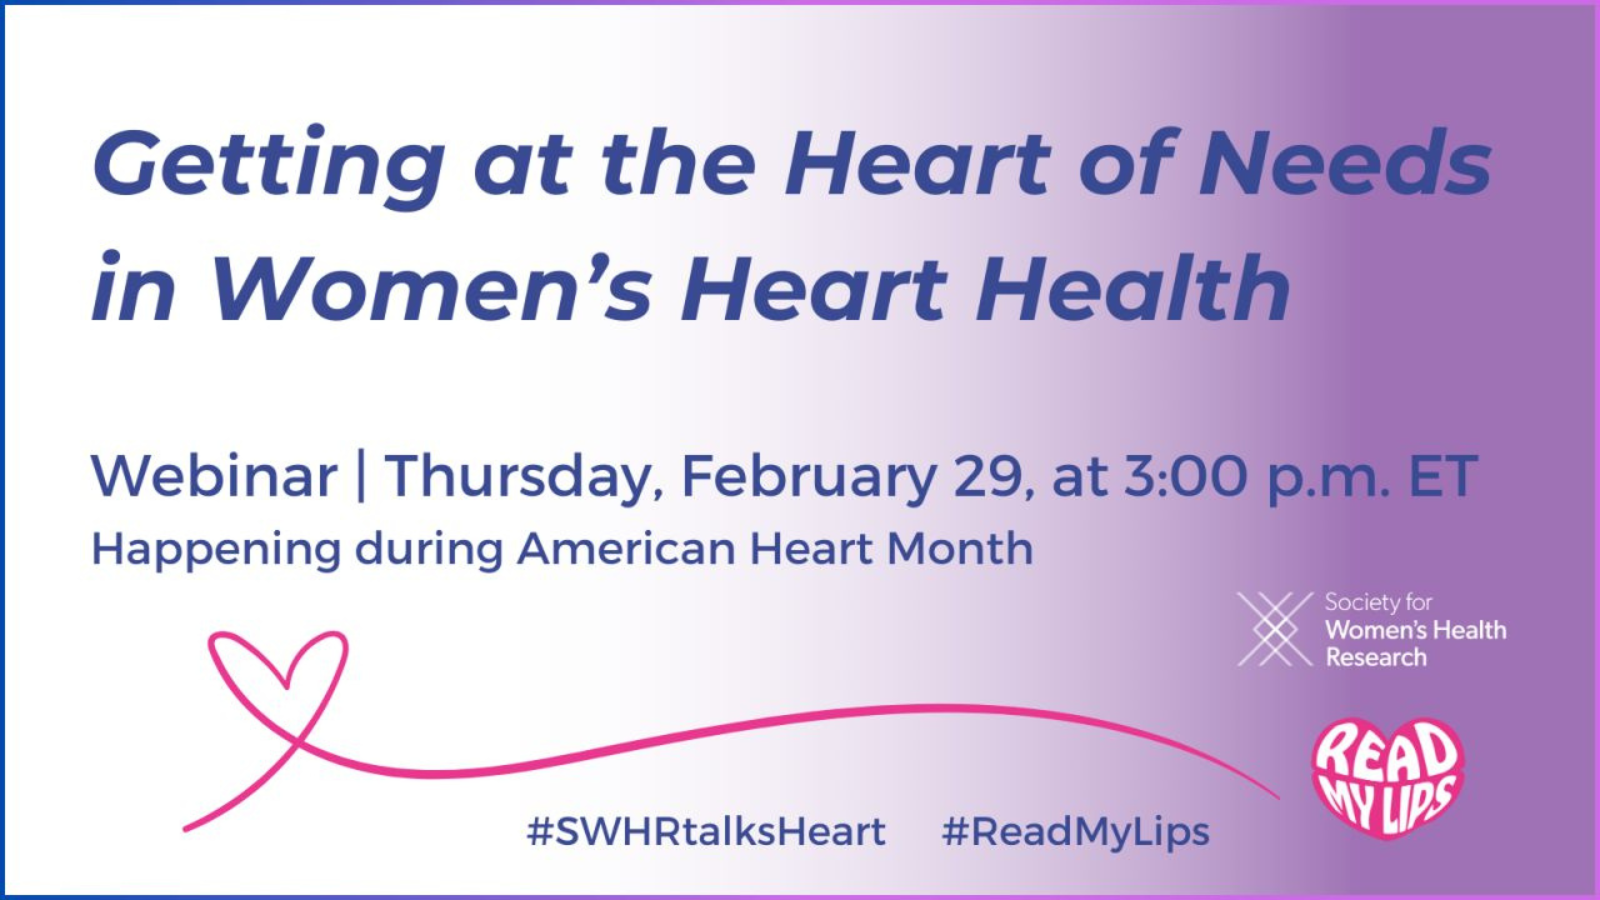 Graphic promoting the "Getting at the Heart of Needs in Women's Heart Health" webinar on Thursday, February 29 at 3pm ET. Happening during American Heart Month.